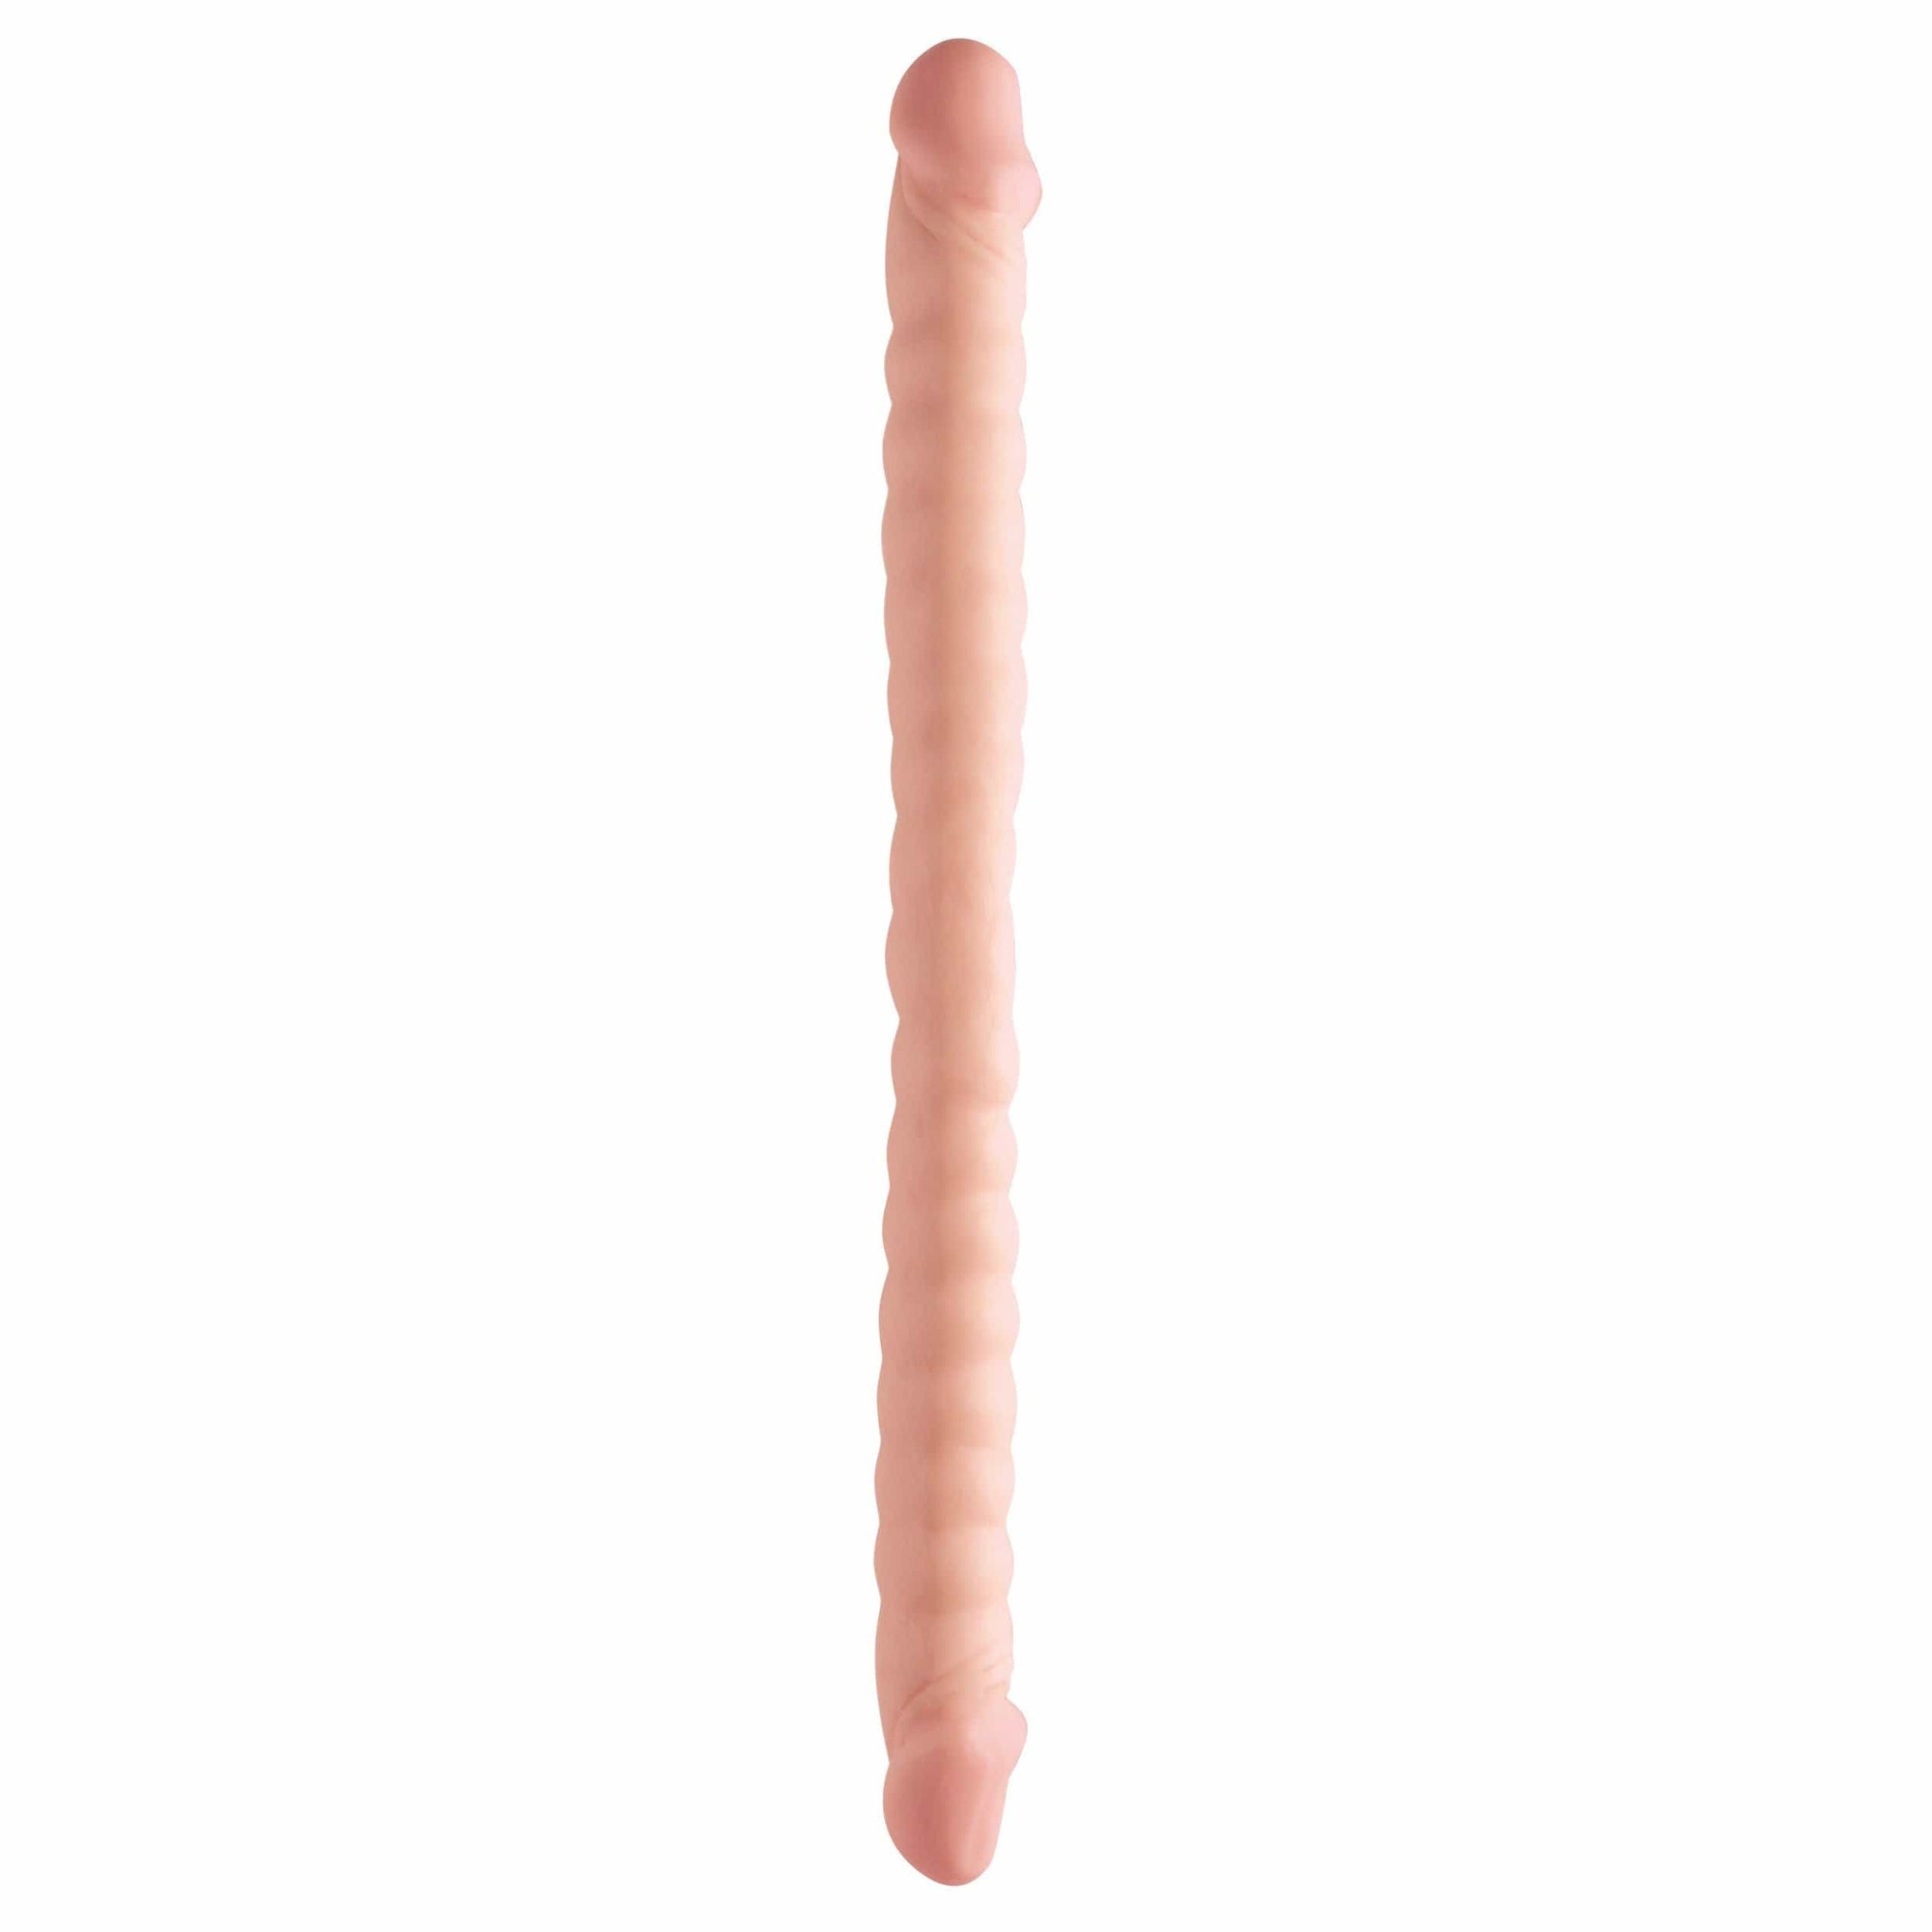 Pipedream - Basix Rubber Works Ribbed Double Dong 18" (Beige) Double Dildo (Non Vibration) 319756394 CherryAffairs